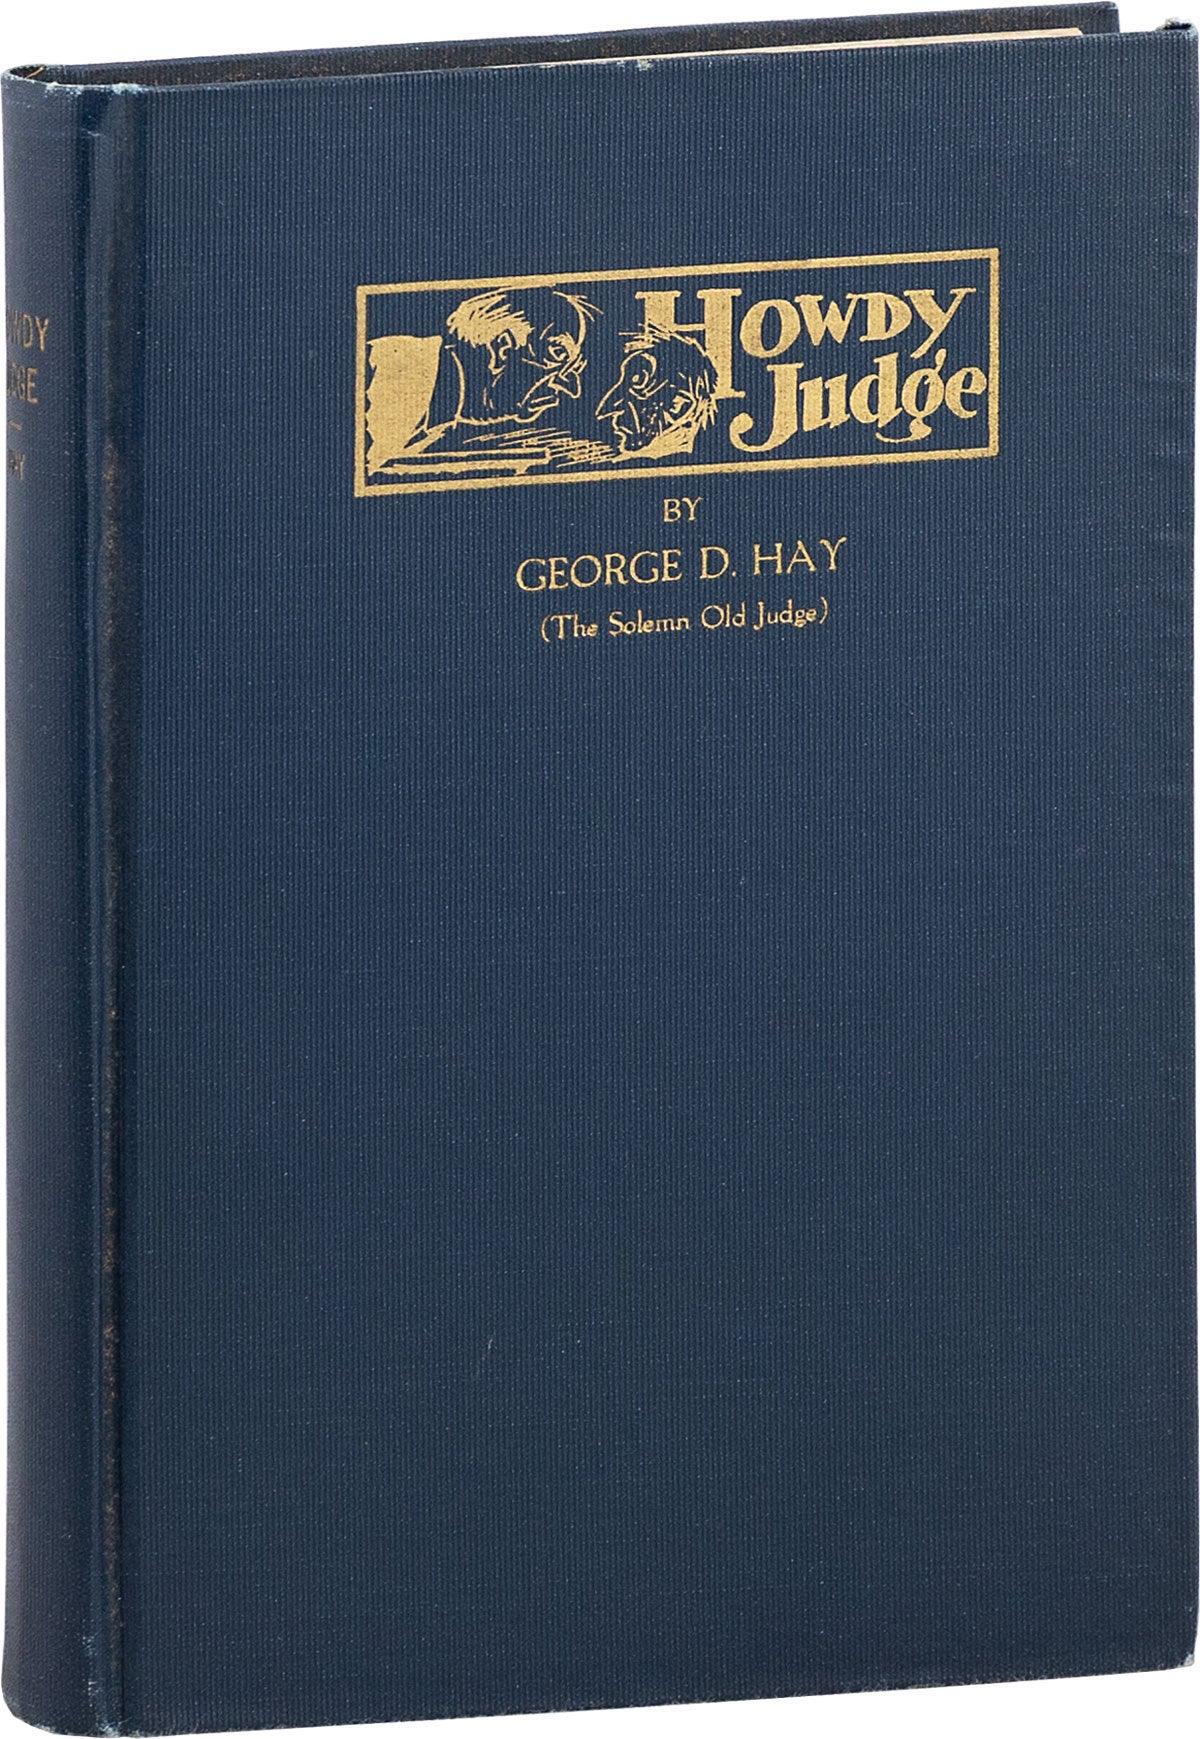 [Item #80739] Howdy Judge [Inscribed]. RACIST LITERATURE, George D. HAY, The Solemn Old Judge, COUNTRY MUSIC INDUSTRY.